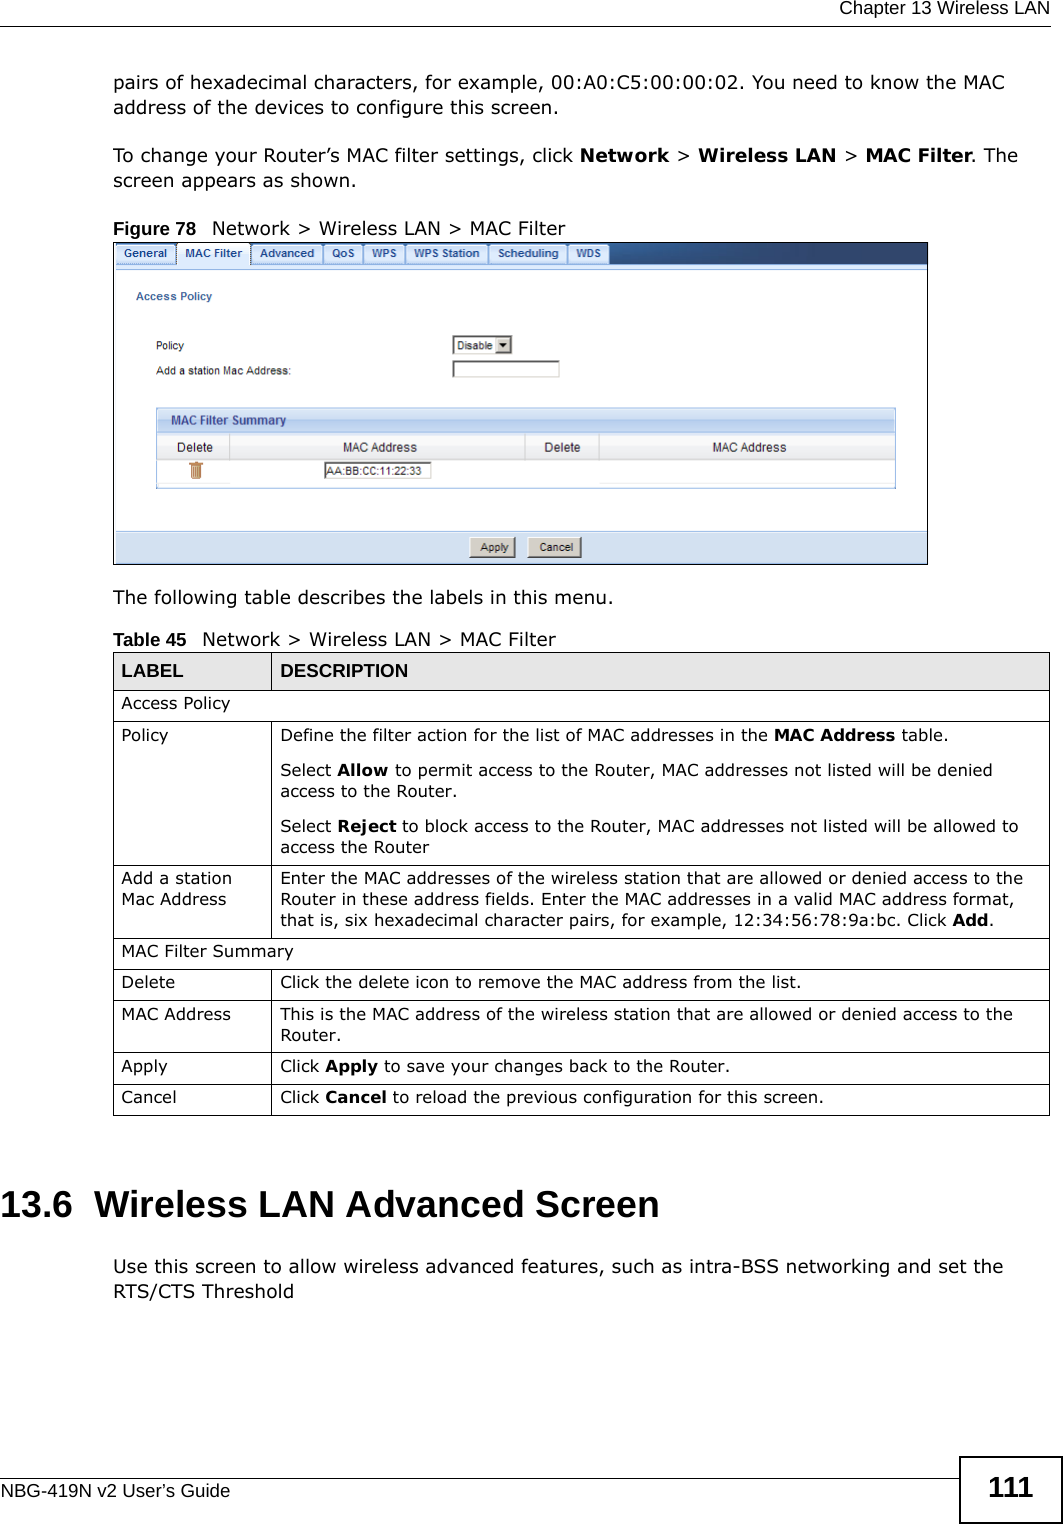  Chapter 13 Wireless LANNBG-419N v2 User’s Guide 111pairs of hexadecimal characters, for example, 00:A0:C5:00:00:02. You need to know the MAC address of the devices to configure this screen.To change your Router’s MAC filter settings, click Network &gt; Wireless LAN &gt; MAC Filter. The screen appears as shown.Figure 78   Network &gt; Wireless LAN &gt; MAC FilterThe following table describes the labels in this menu.13.6  Wireless LAN Advanced ScreenUse this screen to allow wireless advanced features, such as intra-BSS networking and set the  RTS/CTS ThresholdTable 45   Network &gt; Wireless LAN &gt; MAC FilterLABEL DESCRIPTIONAccess PolicyPolicy  Define the filter action for the list of MAC addresses in the MAC Address table. Select Allow to permit access to the Router, MAC addresses not listed will be denied access to the Router. Select Reject to block access to the Router, MAC addresses not listed will be allowed to access the Router Add a station Mac AddressEnter the MAC addresses of the wireless station that are allowed or denied access to the Router in these address fields. Enter the MAC addresses in a valid MAC address format, that is, six hexadecimal character pairs, for example, 12:34:56:78:9a:bc. Click Add.MAC Filter SummaryDelete Click the delete icon to remove the MAC address from the list.MAC Address This is the MAC address of the wireless station that are allowed or denied access to the Router.Apply Click Apply to save your changes back to the Router.Cancel Click Cancel to reload the previous configuration for this screen.